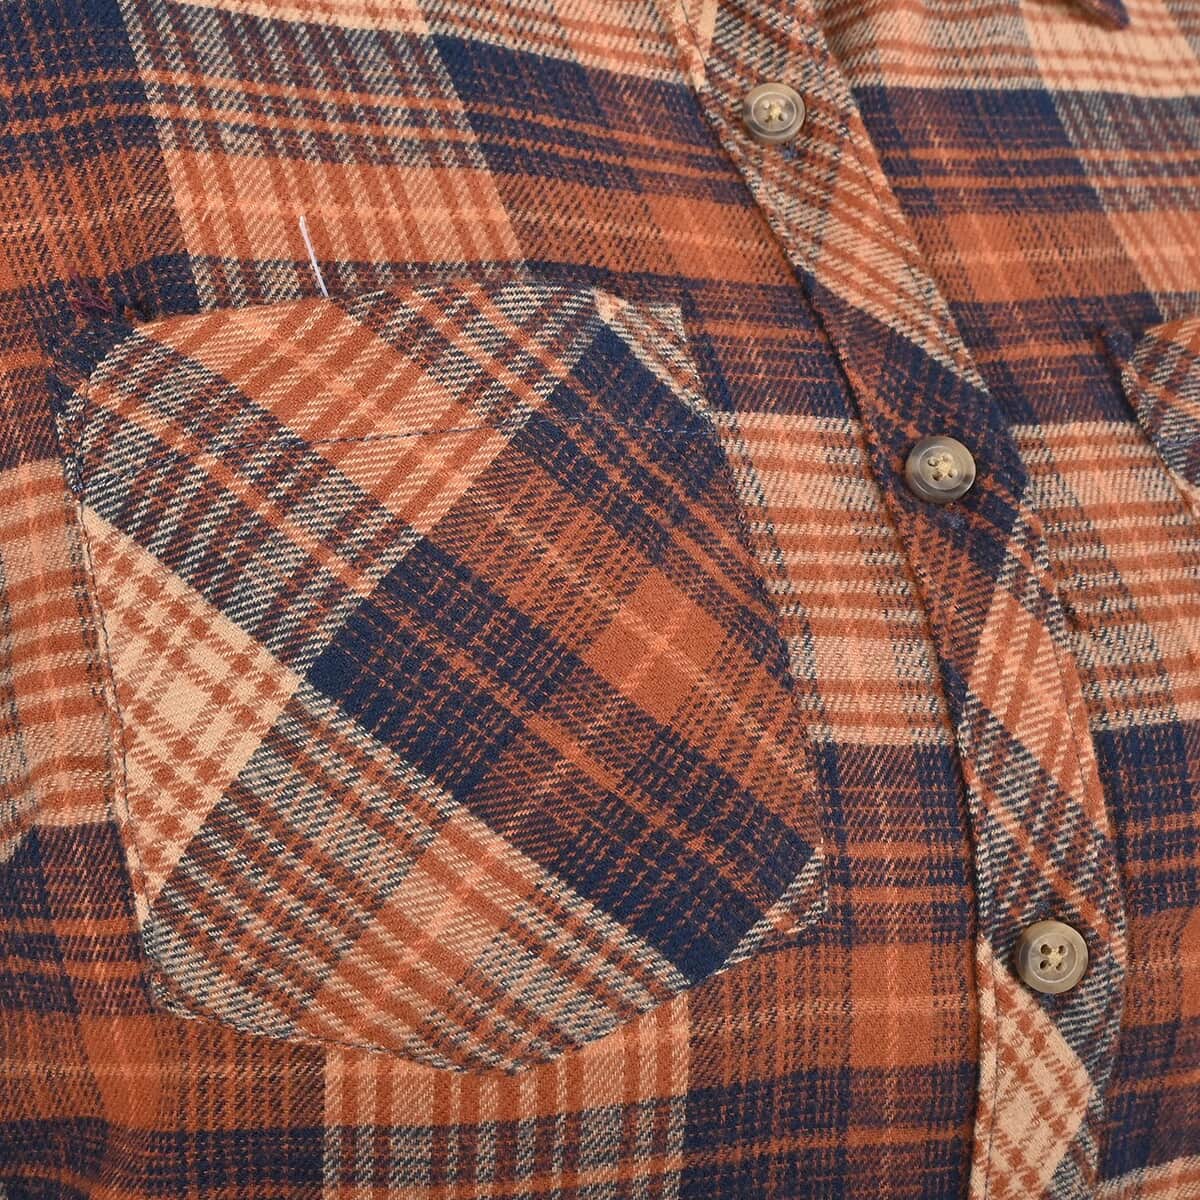 Victory Sportswear Tan and Black Plaid Pattern Cotton Flannel Shirt - S image number 5